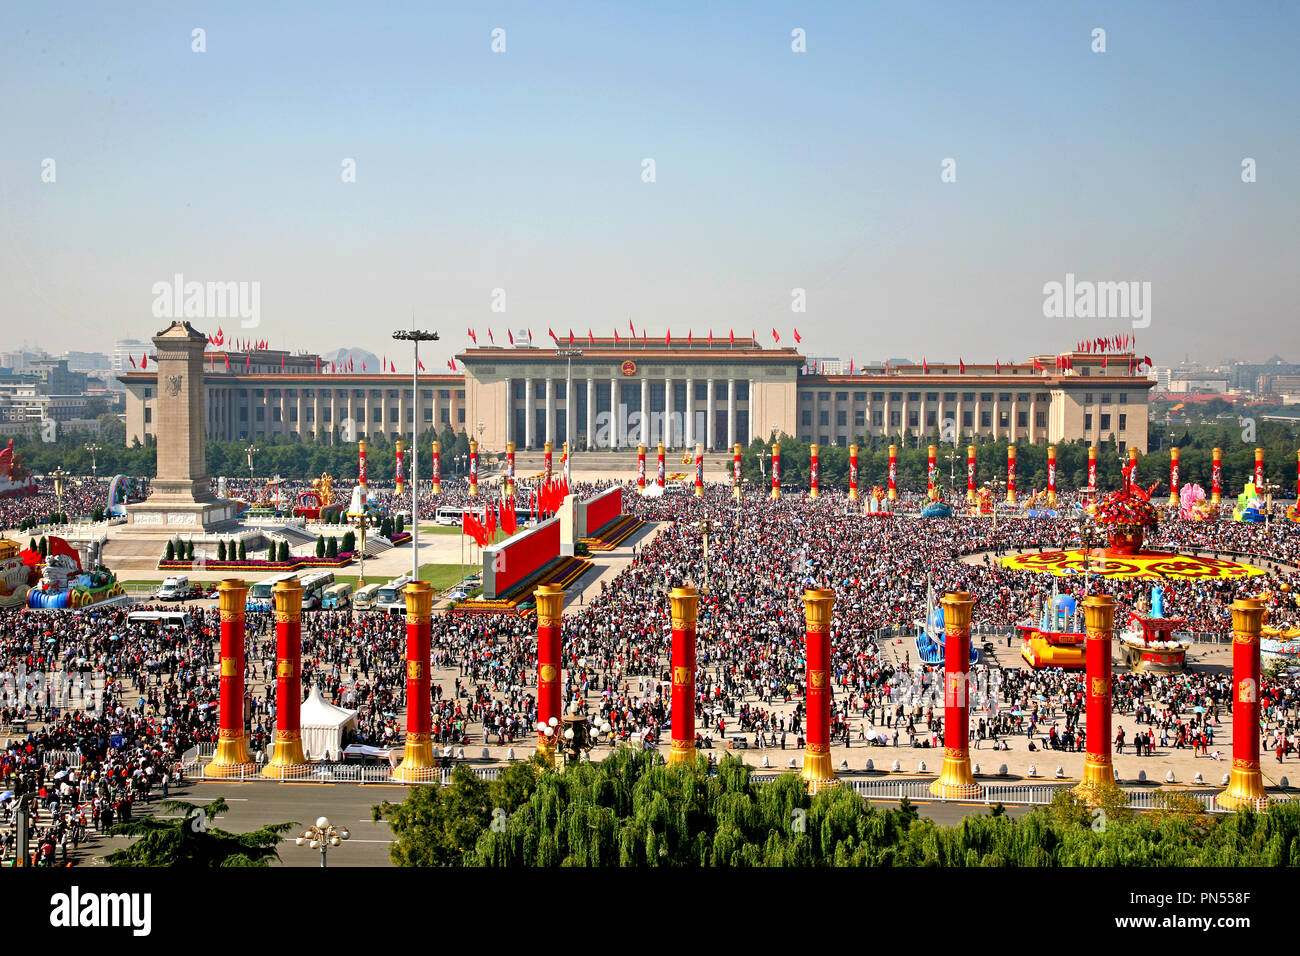 The great hall of the people at tiananmen square Stock Photo